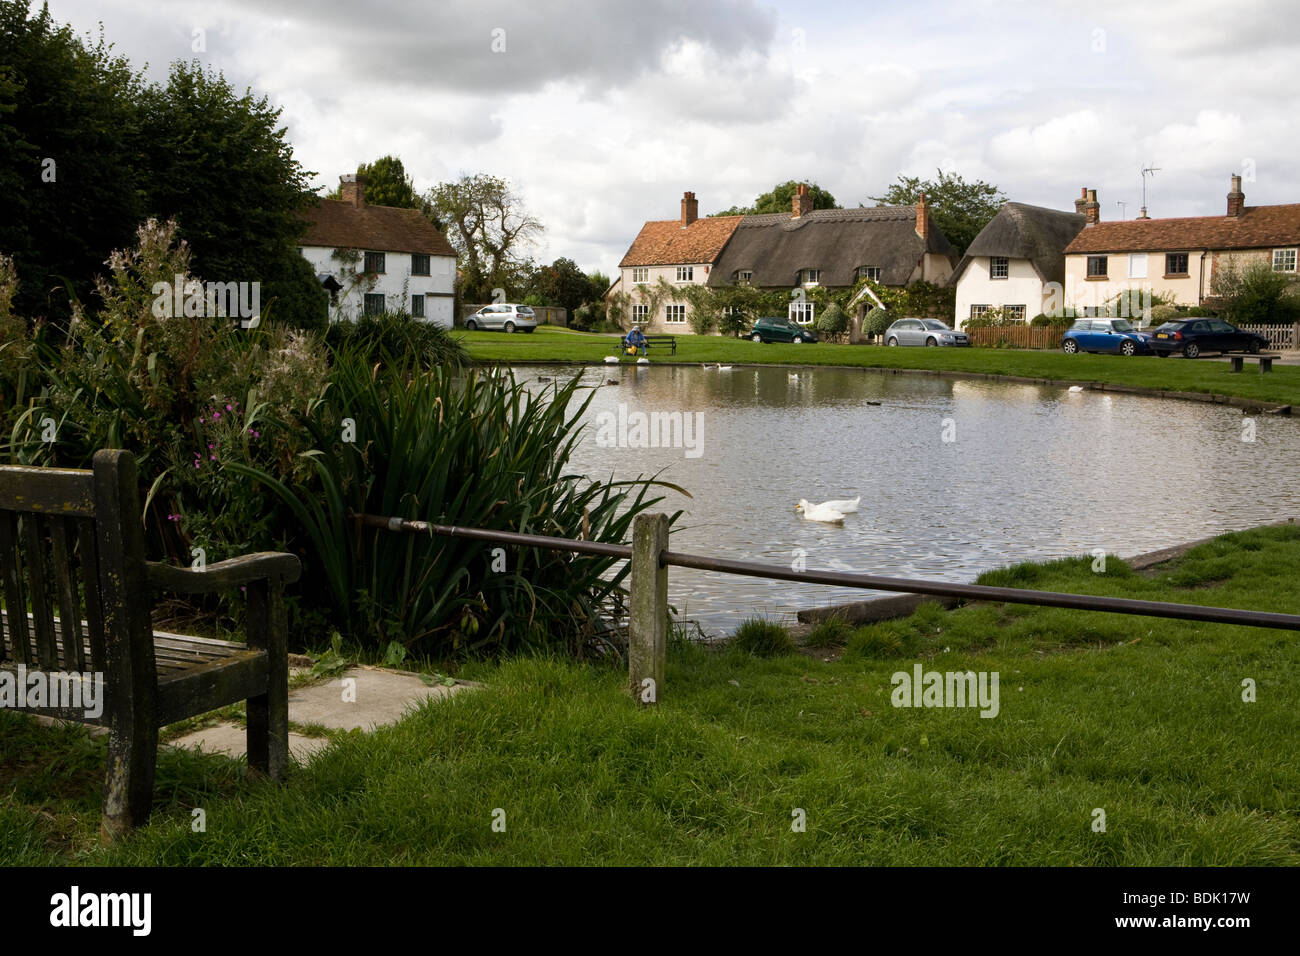 pond with ducks in an English village Stock Photo